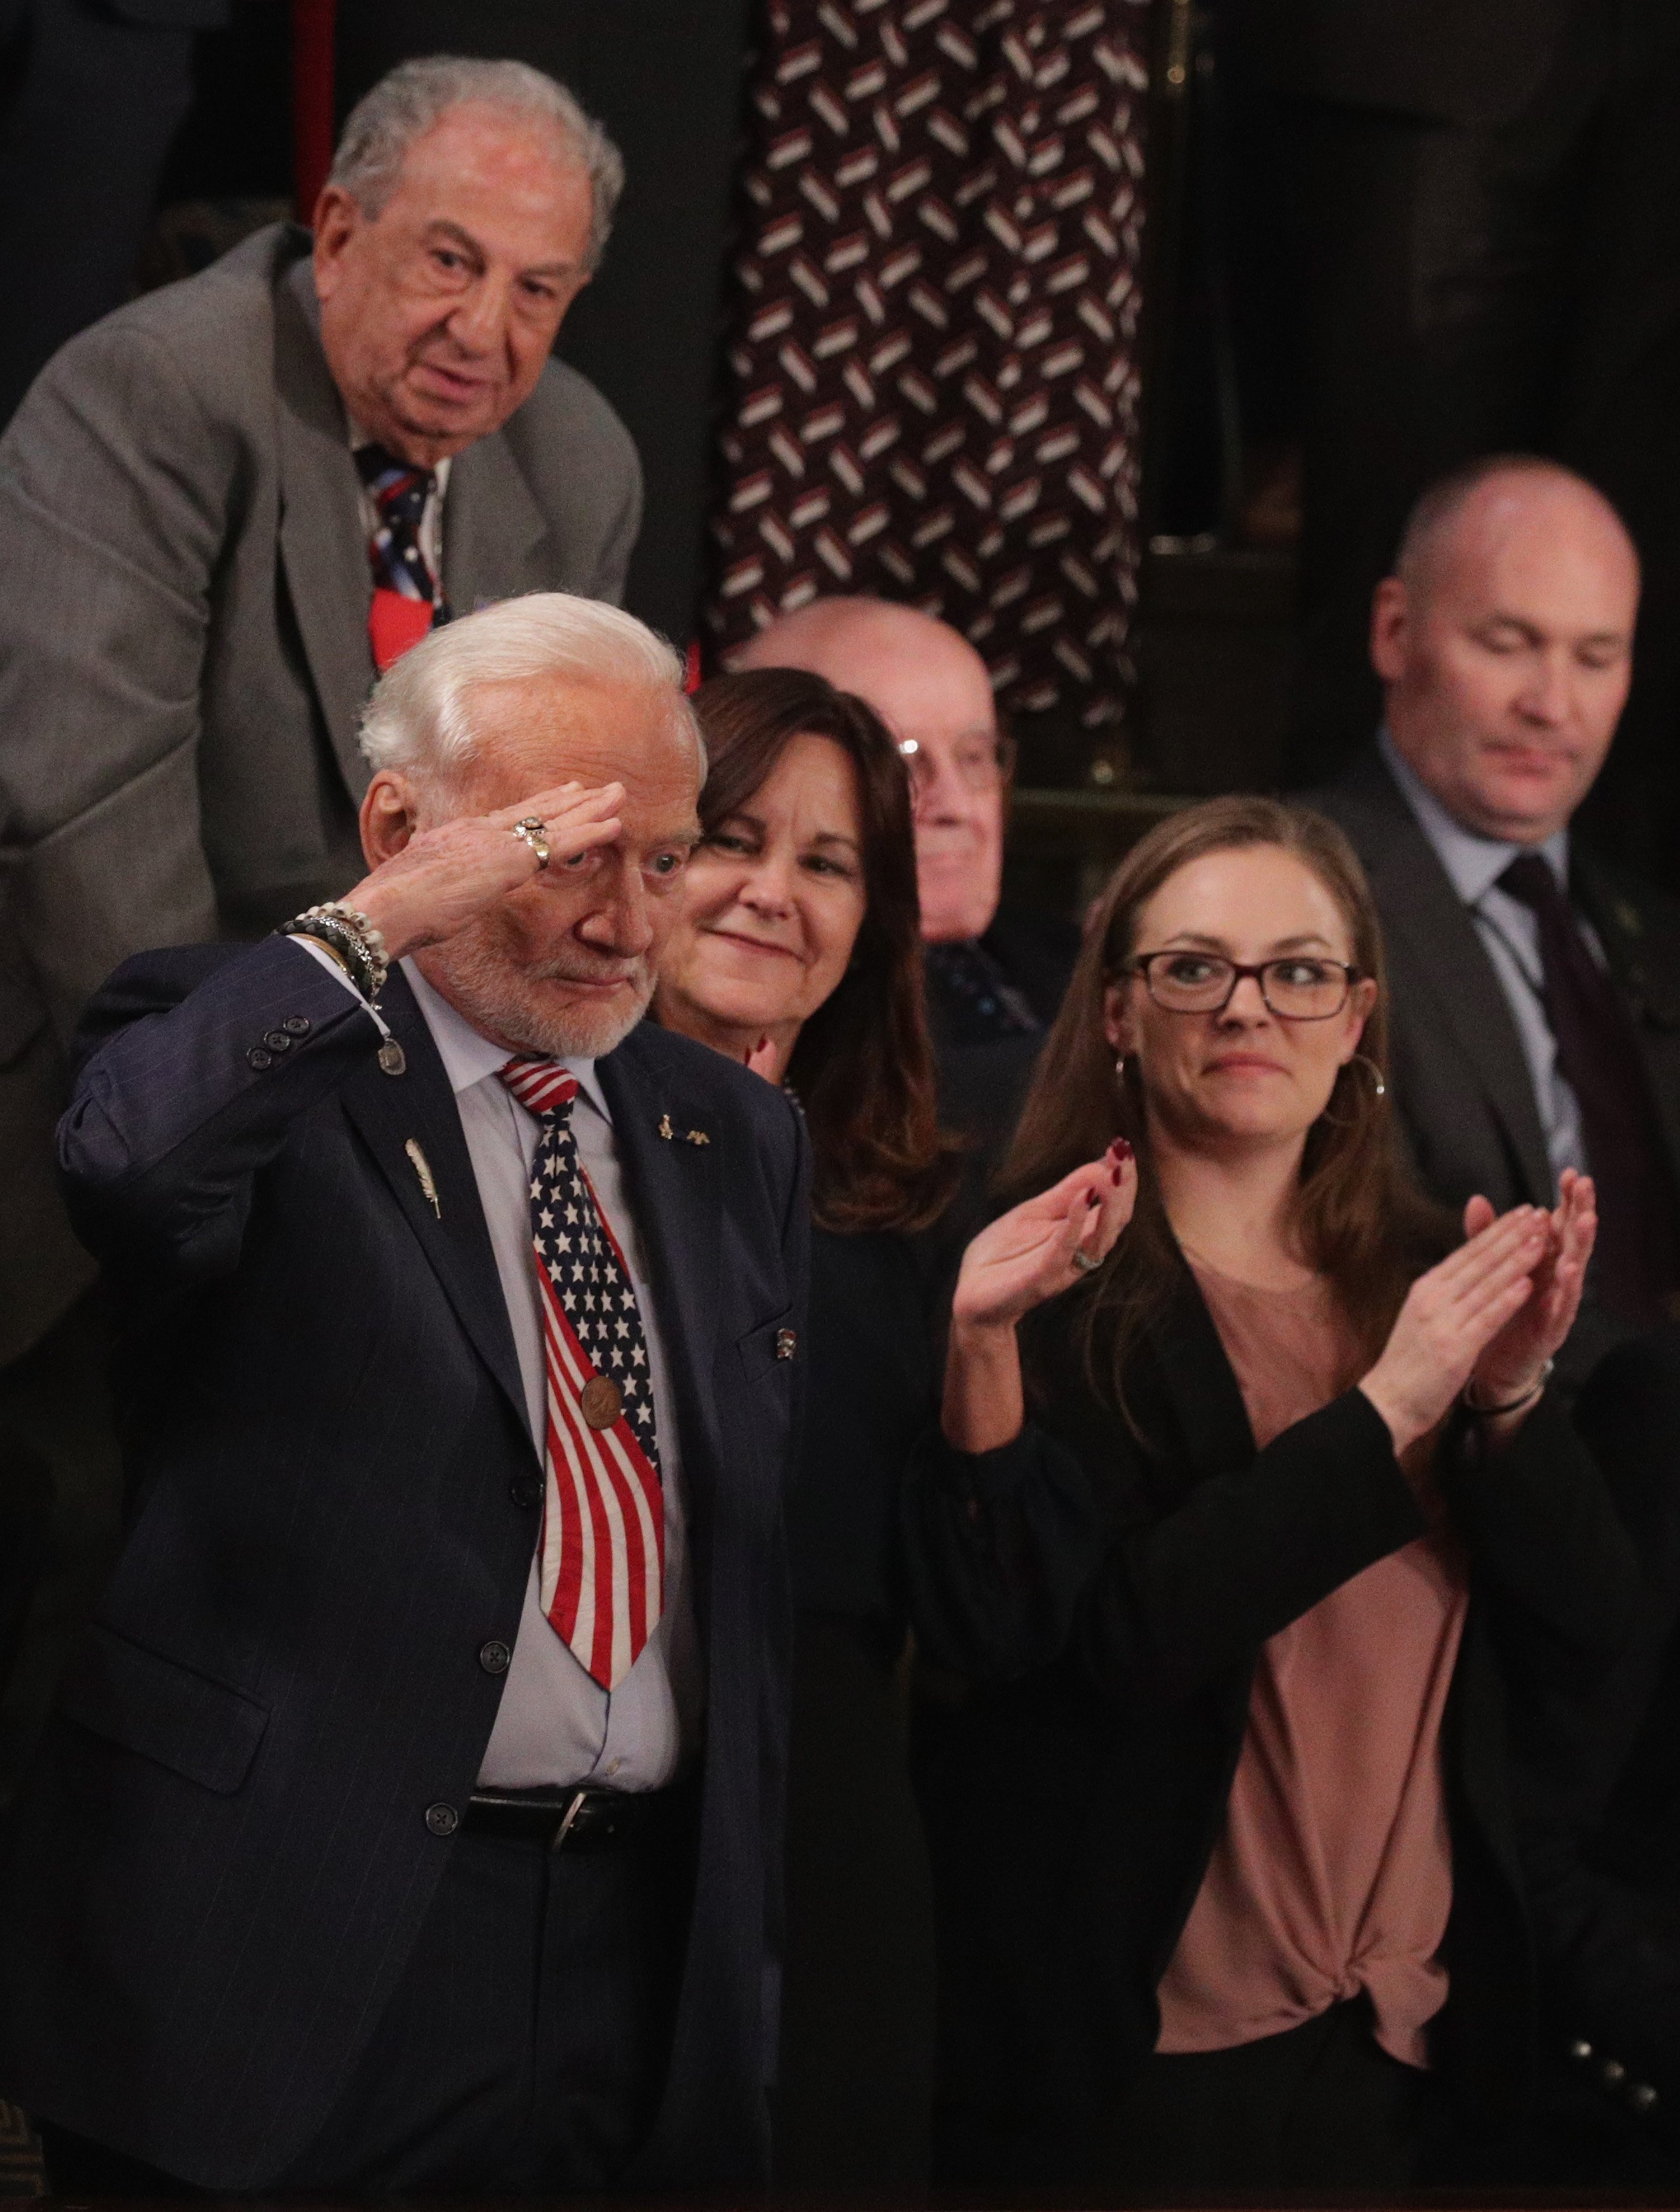 Buzz Aldrin saluting Donald Trump during the State of the Union address | Photo: Getty Images